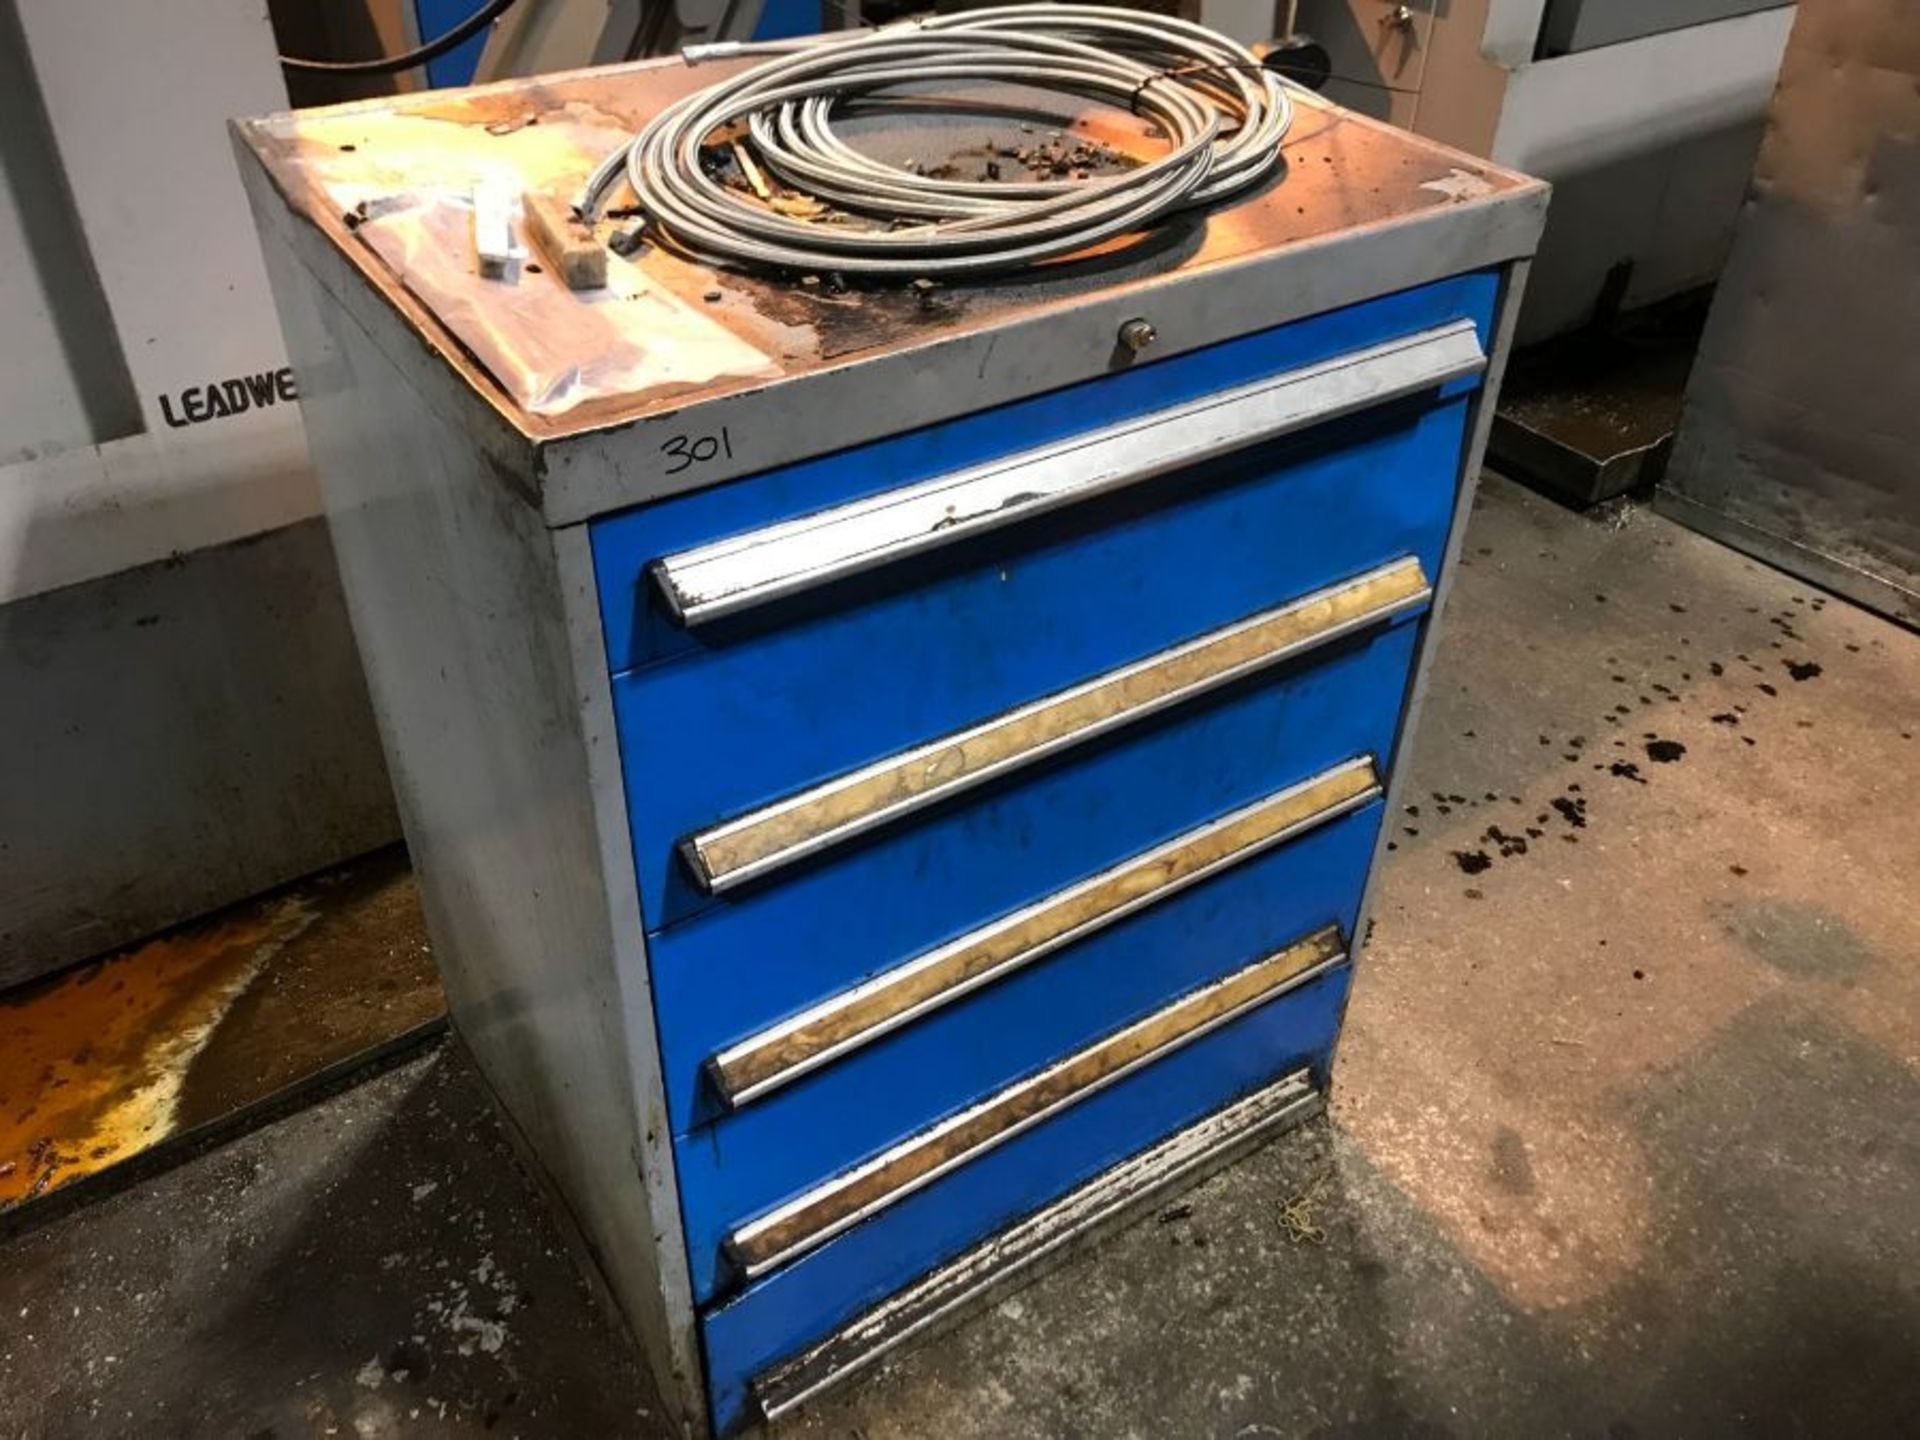 2 Tool cabinets and turning contents